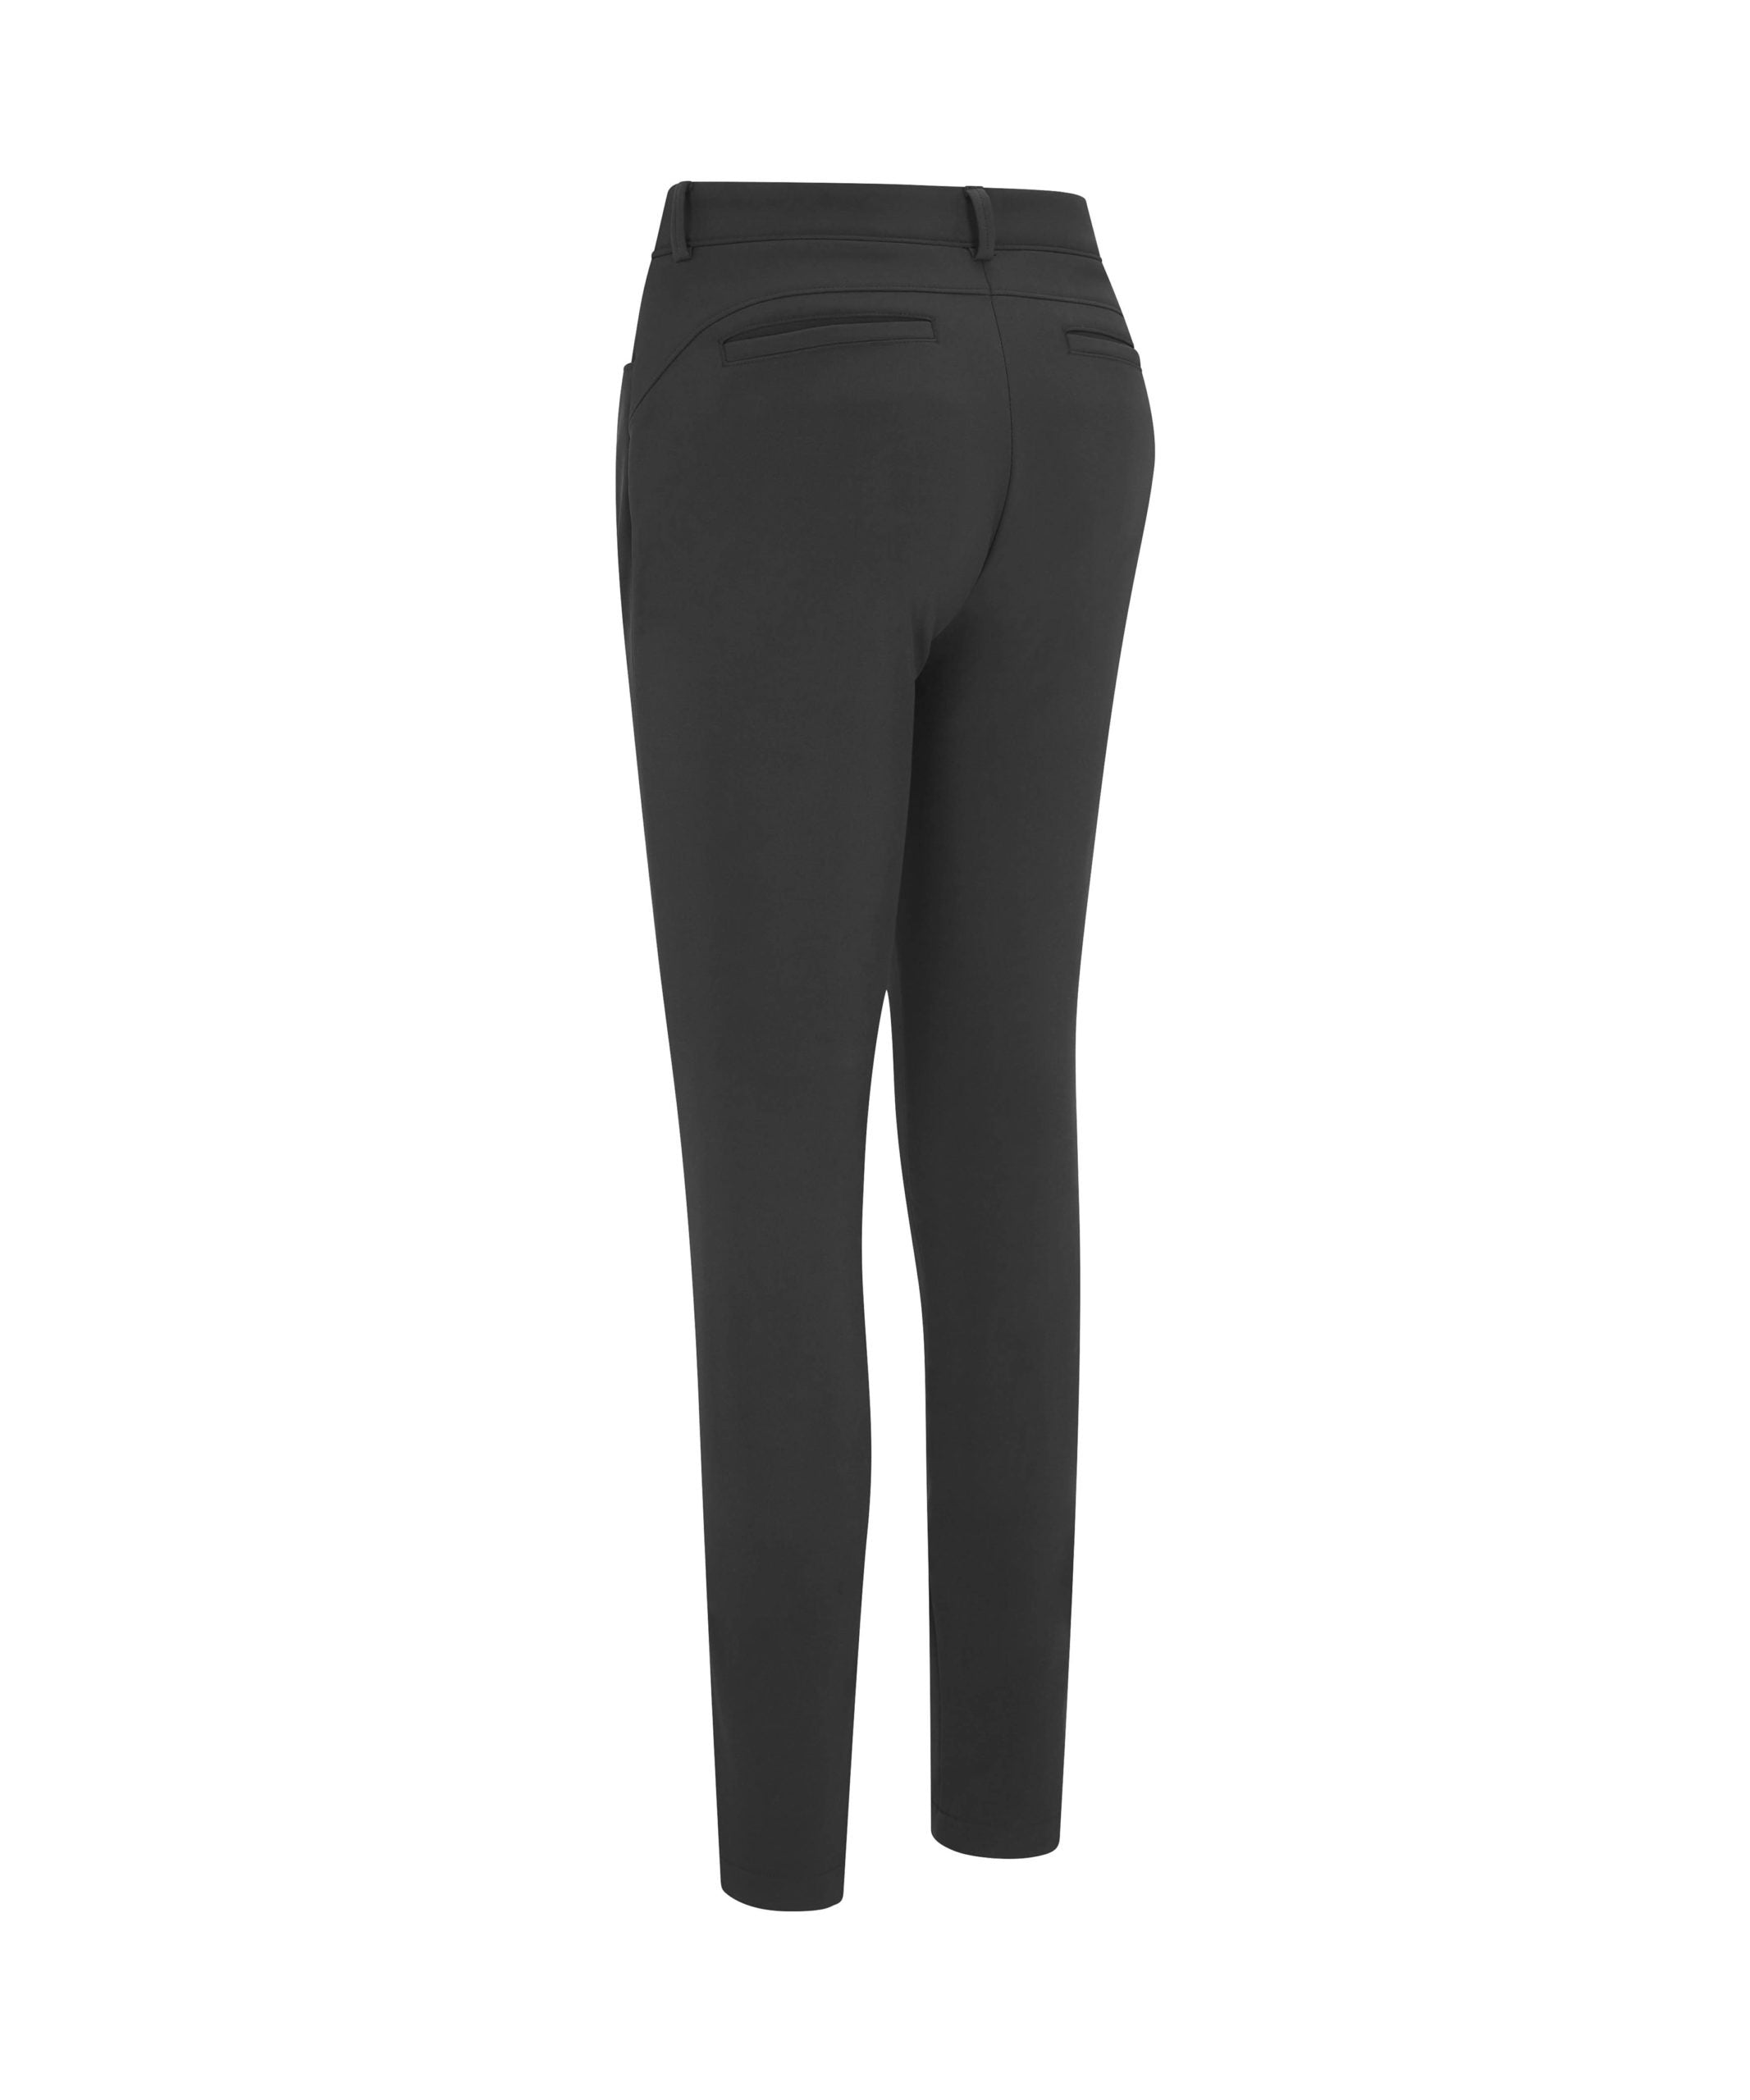 View Thermal Trousers In Caviar Caviar XS 29 information